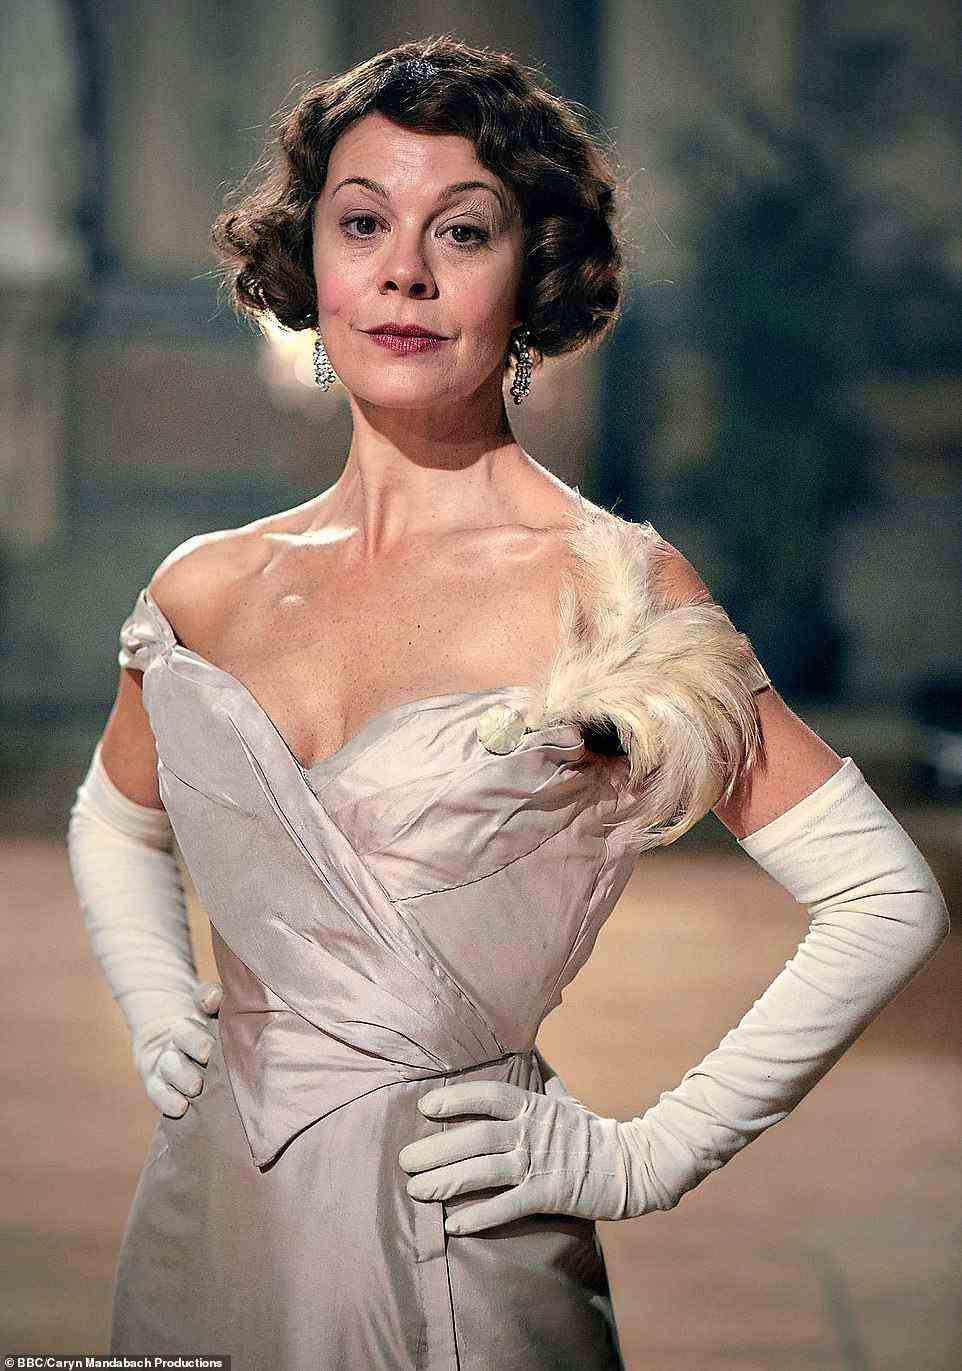 So sad: The premiere comes following the news that the late Helen McCrory did not film any scenes as her iconic character Aunt Polly in the sixth and final series of Peaky Blinders following her cancer diagnosis